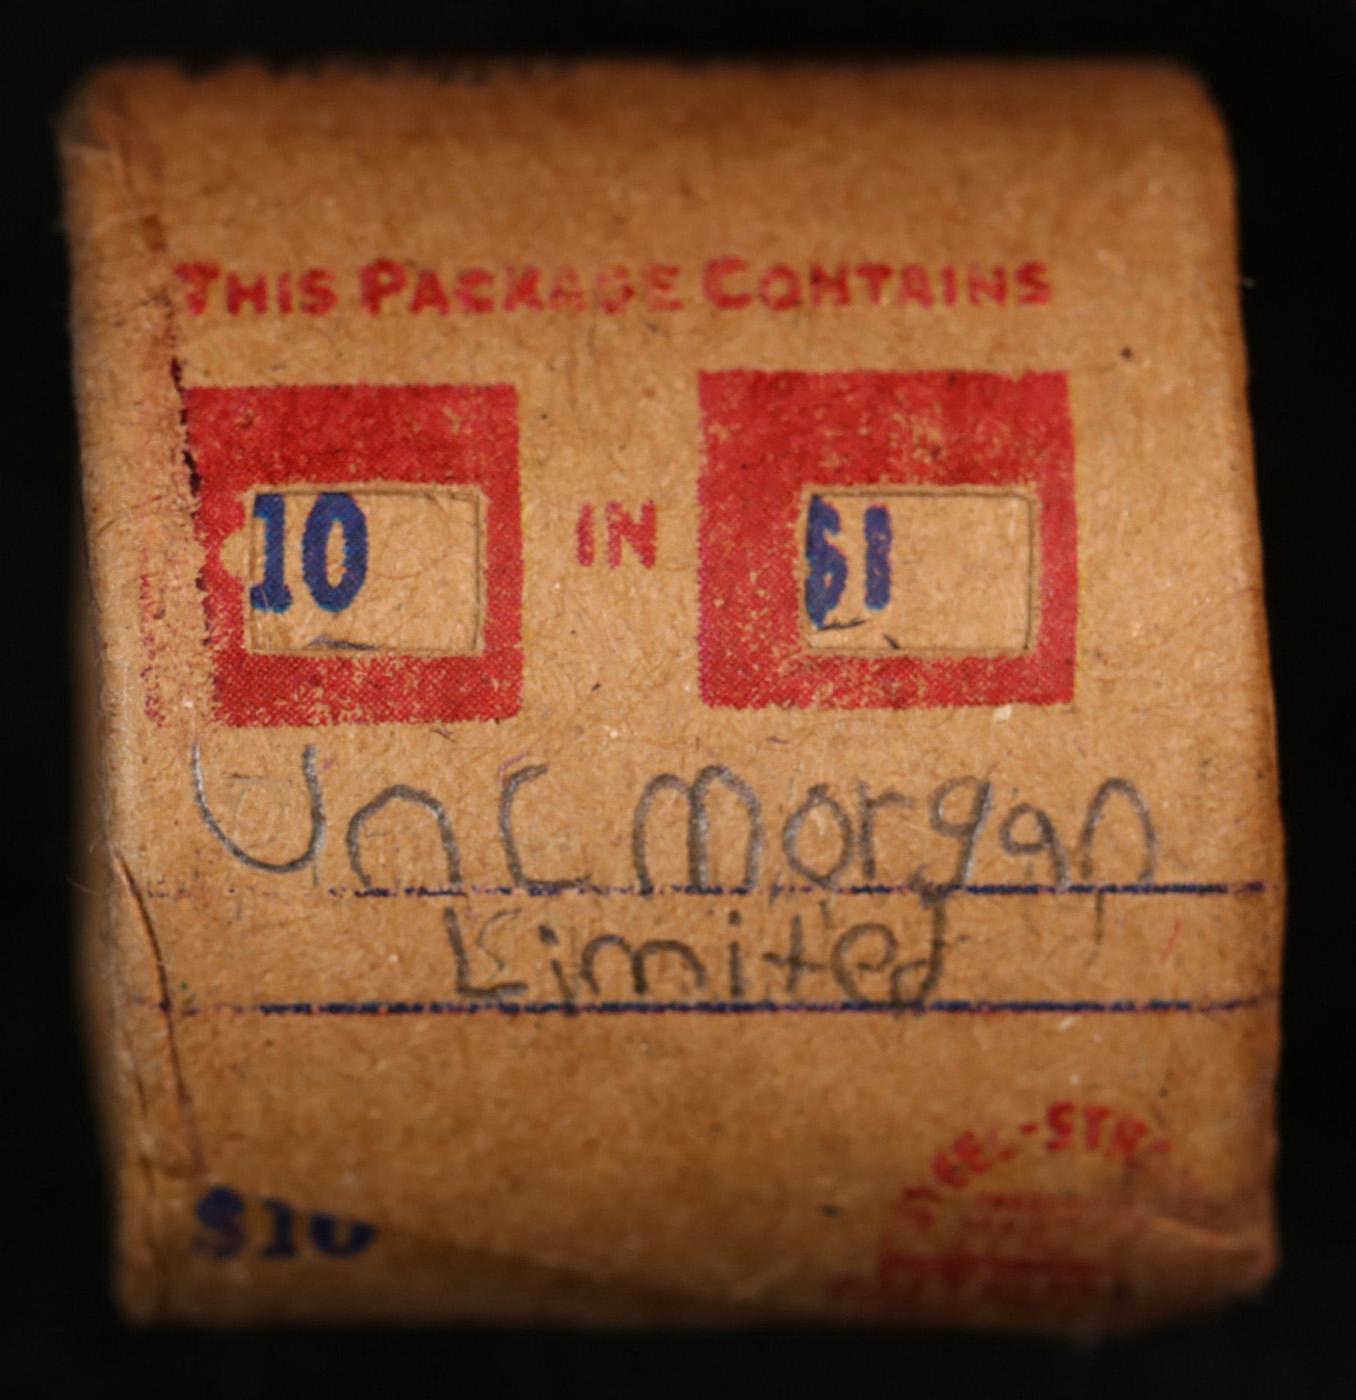 *Uncovered Hoard* - Covered End Roll - Marked "Unc Morgan Limited" - Weight shows x10 Coins (FC)